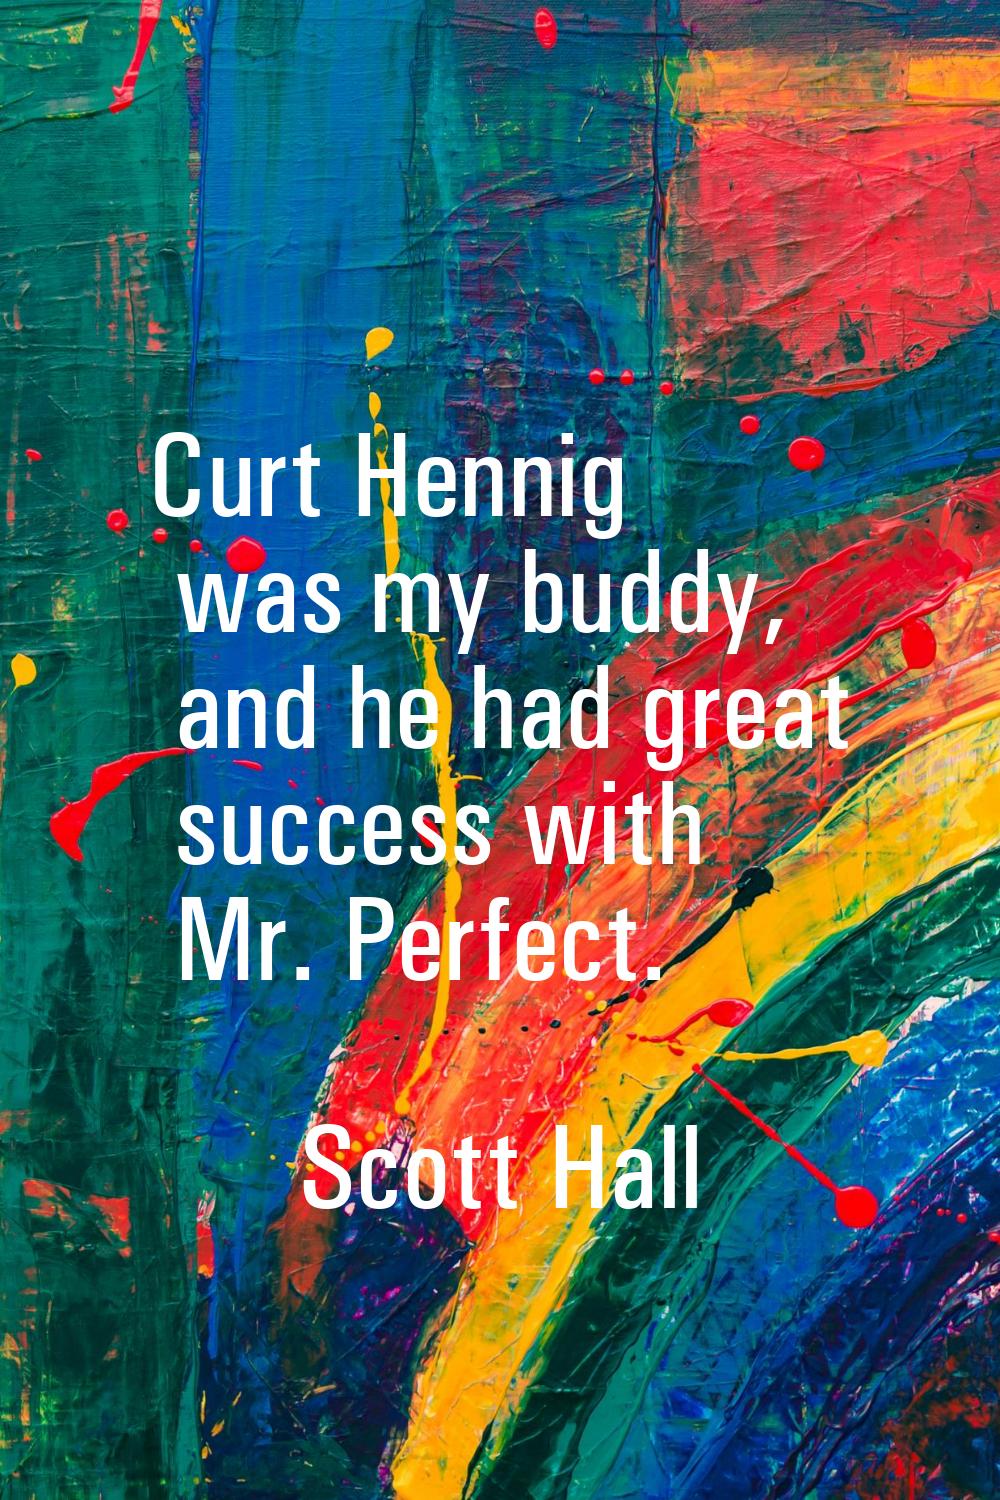 Curt Hennig was my buddy, and he had great success with Mr. Perfect.